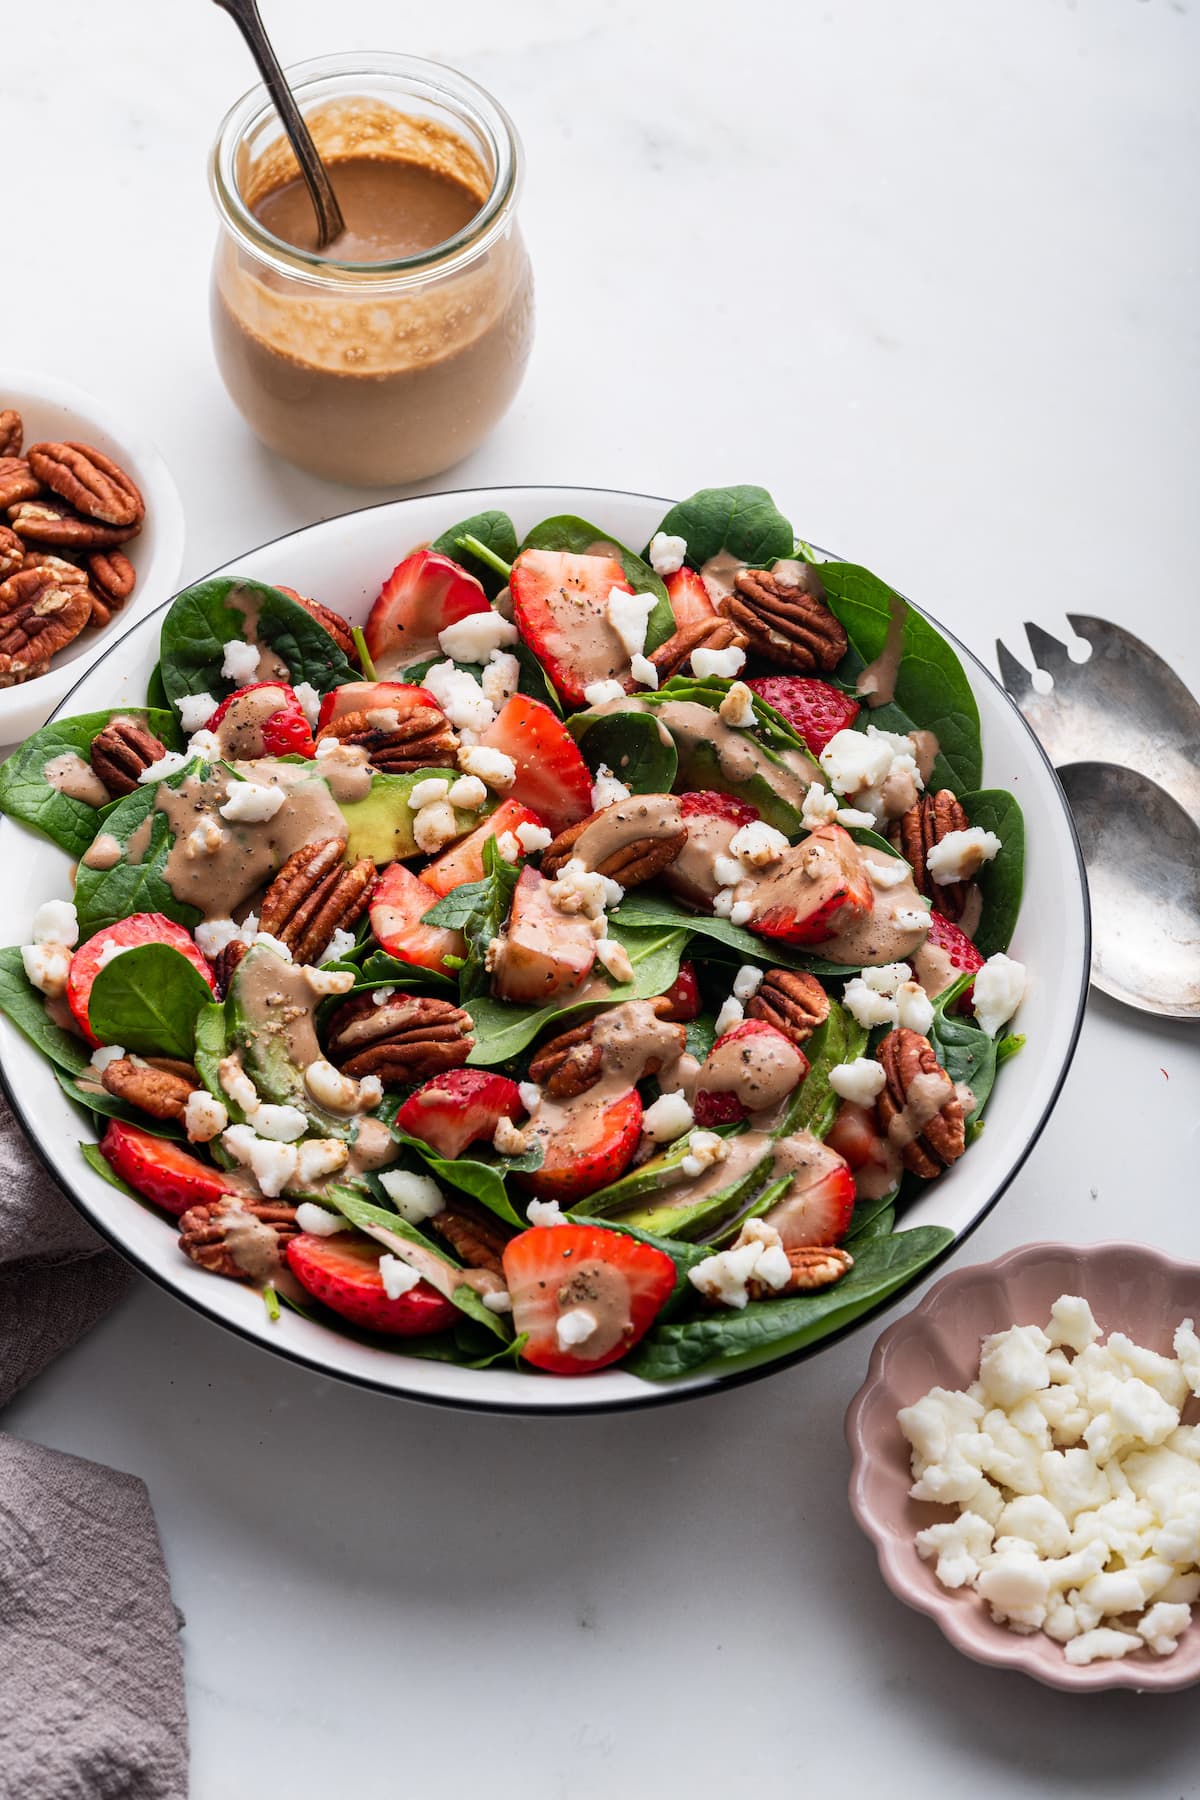 Strawberry spinach salad in a serving bowl drizzled with creamy balsamic dressing.